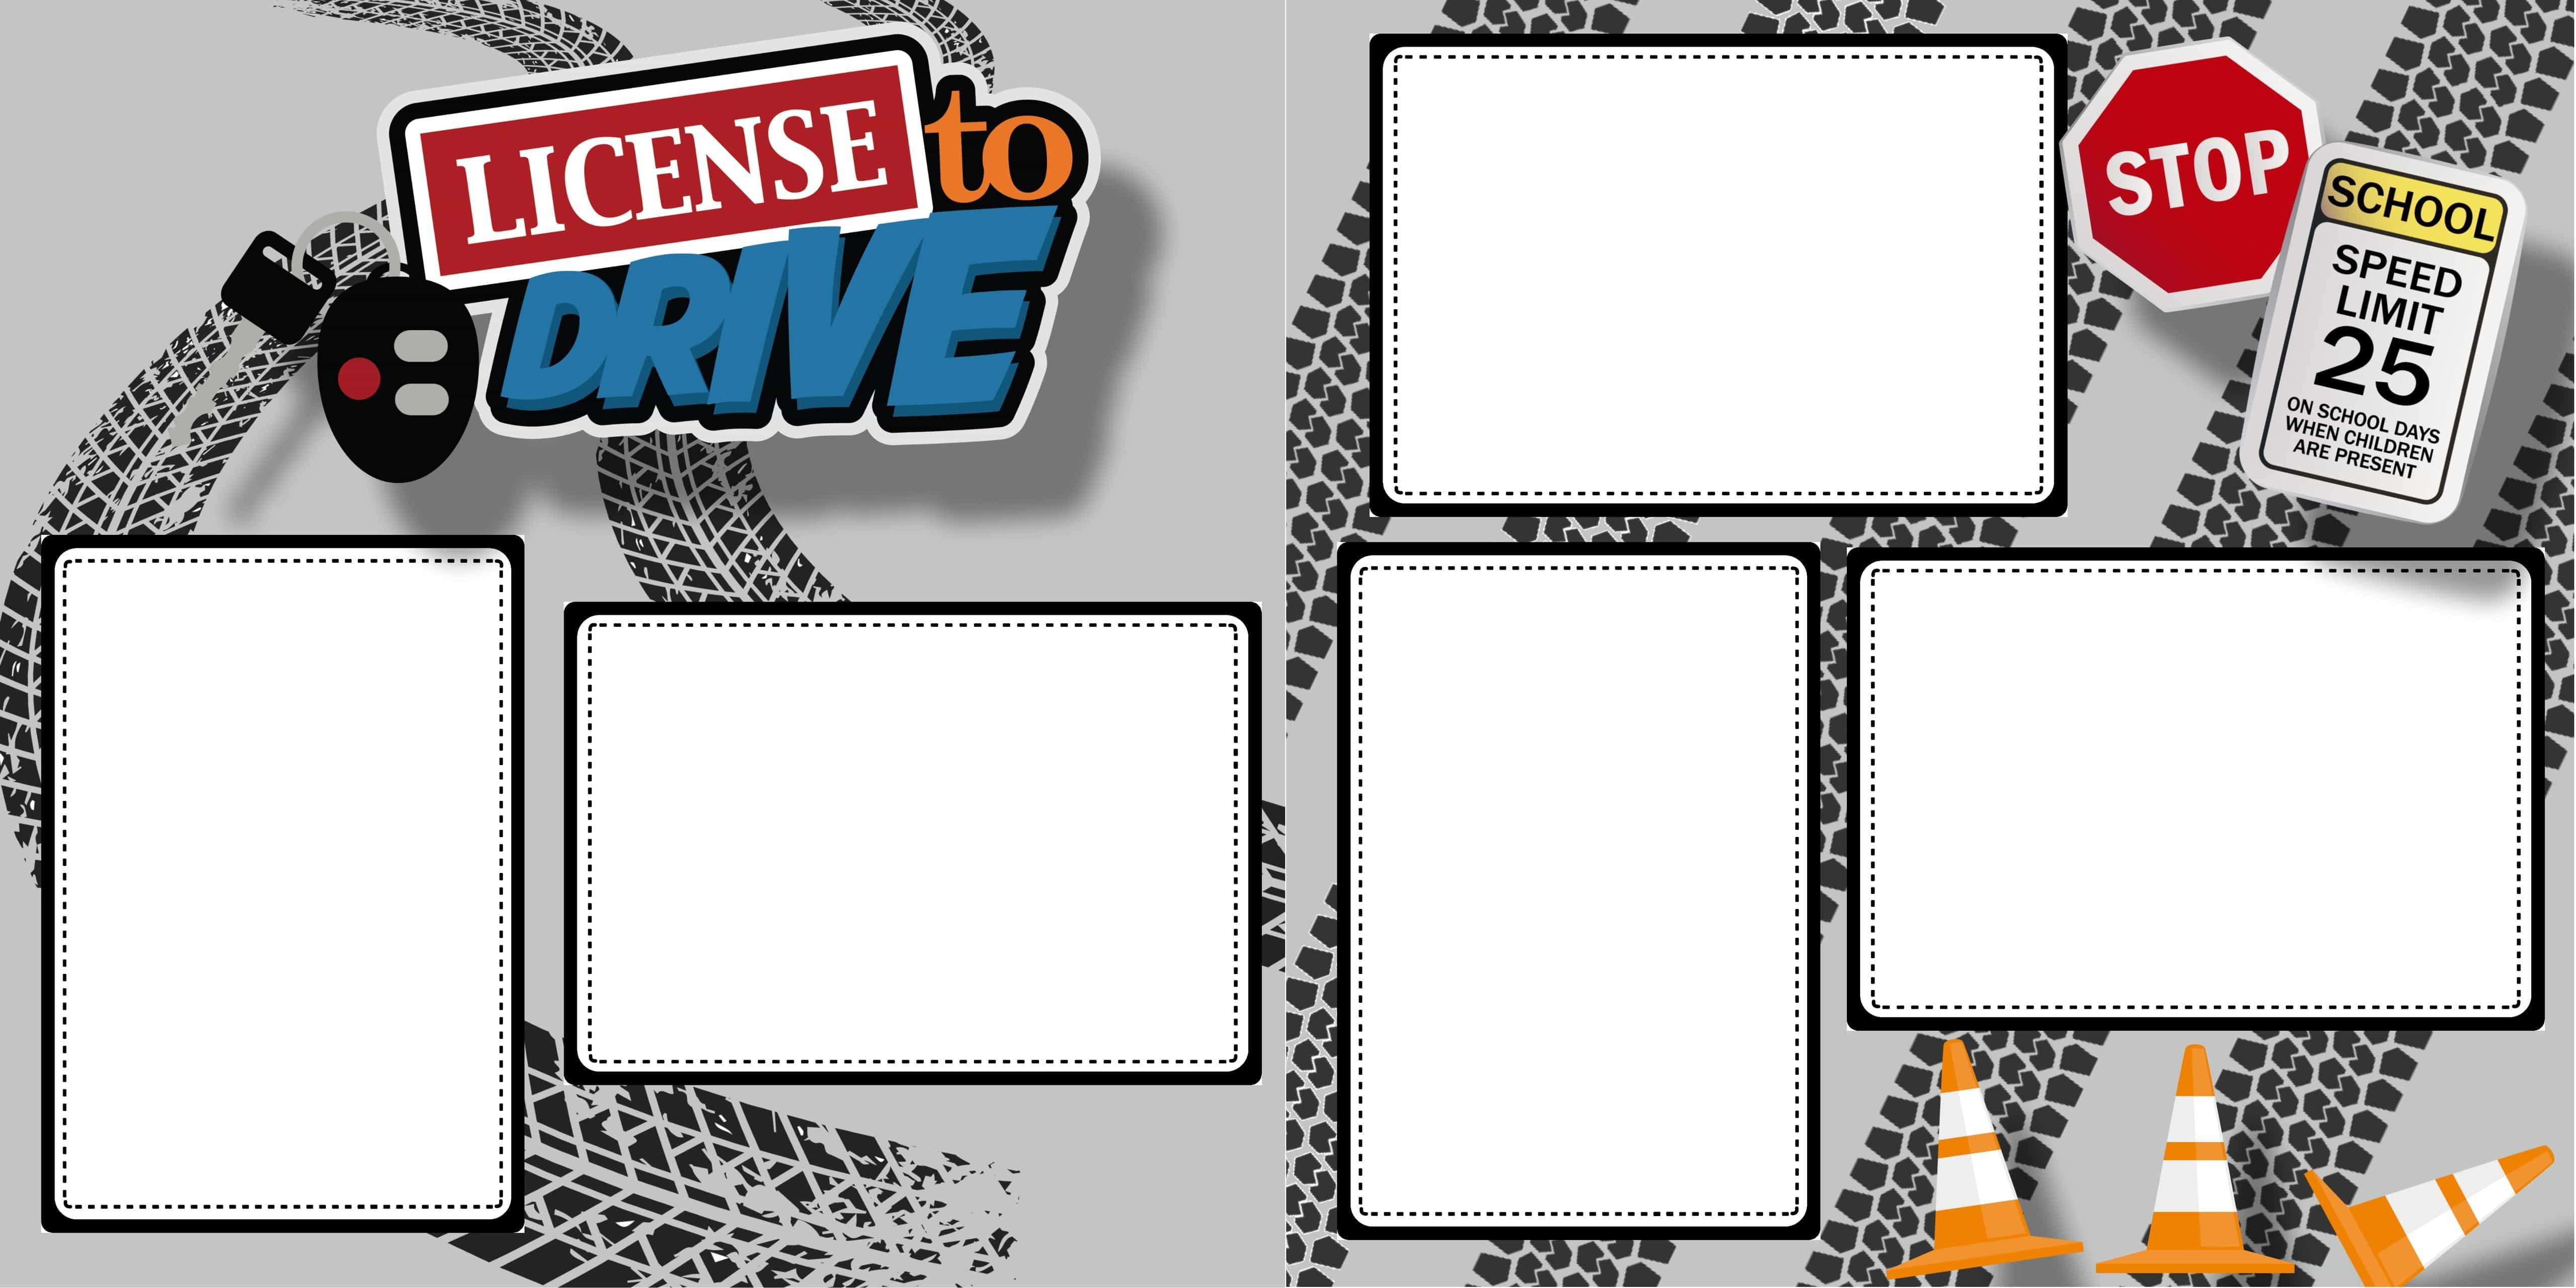 License To Drive Student Driver (2) - 12 x 12 Premade, Printed Scrapbook Pages by SSC Designs